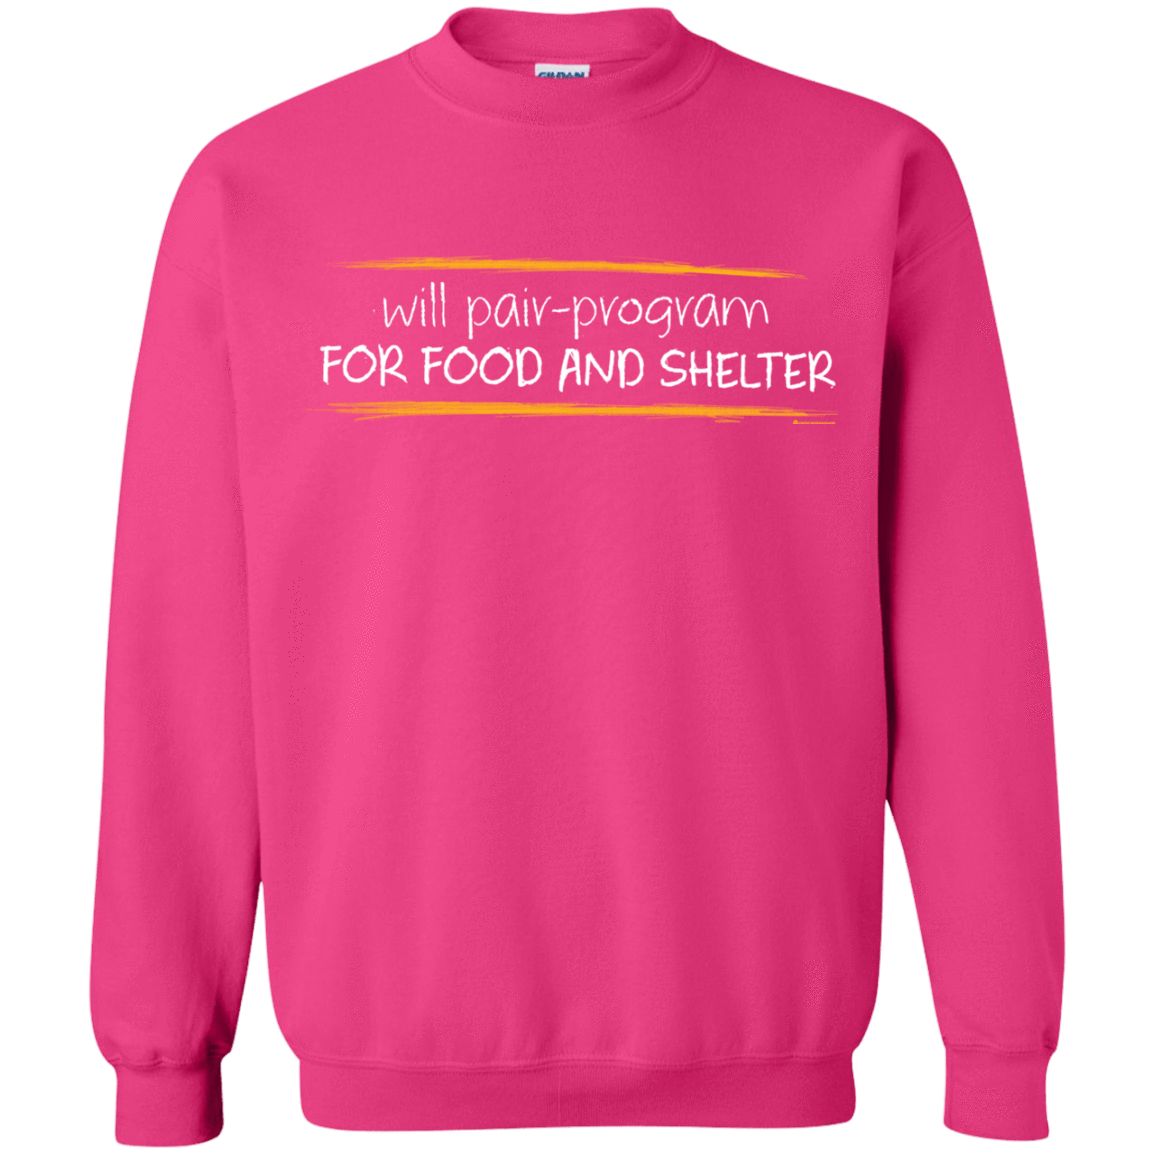 Sweatshirts Heliconia / Small Pair Programming For Food And Shelter Crewneck Sweatshirt